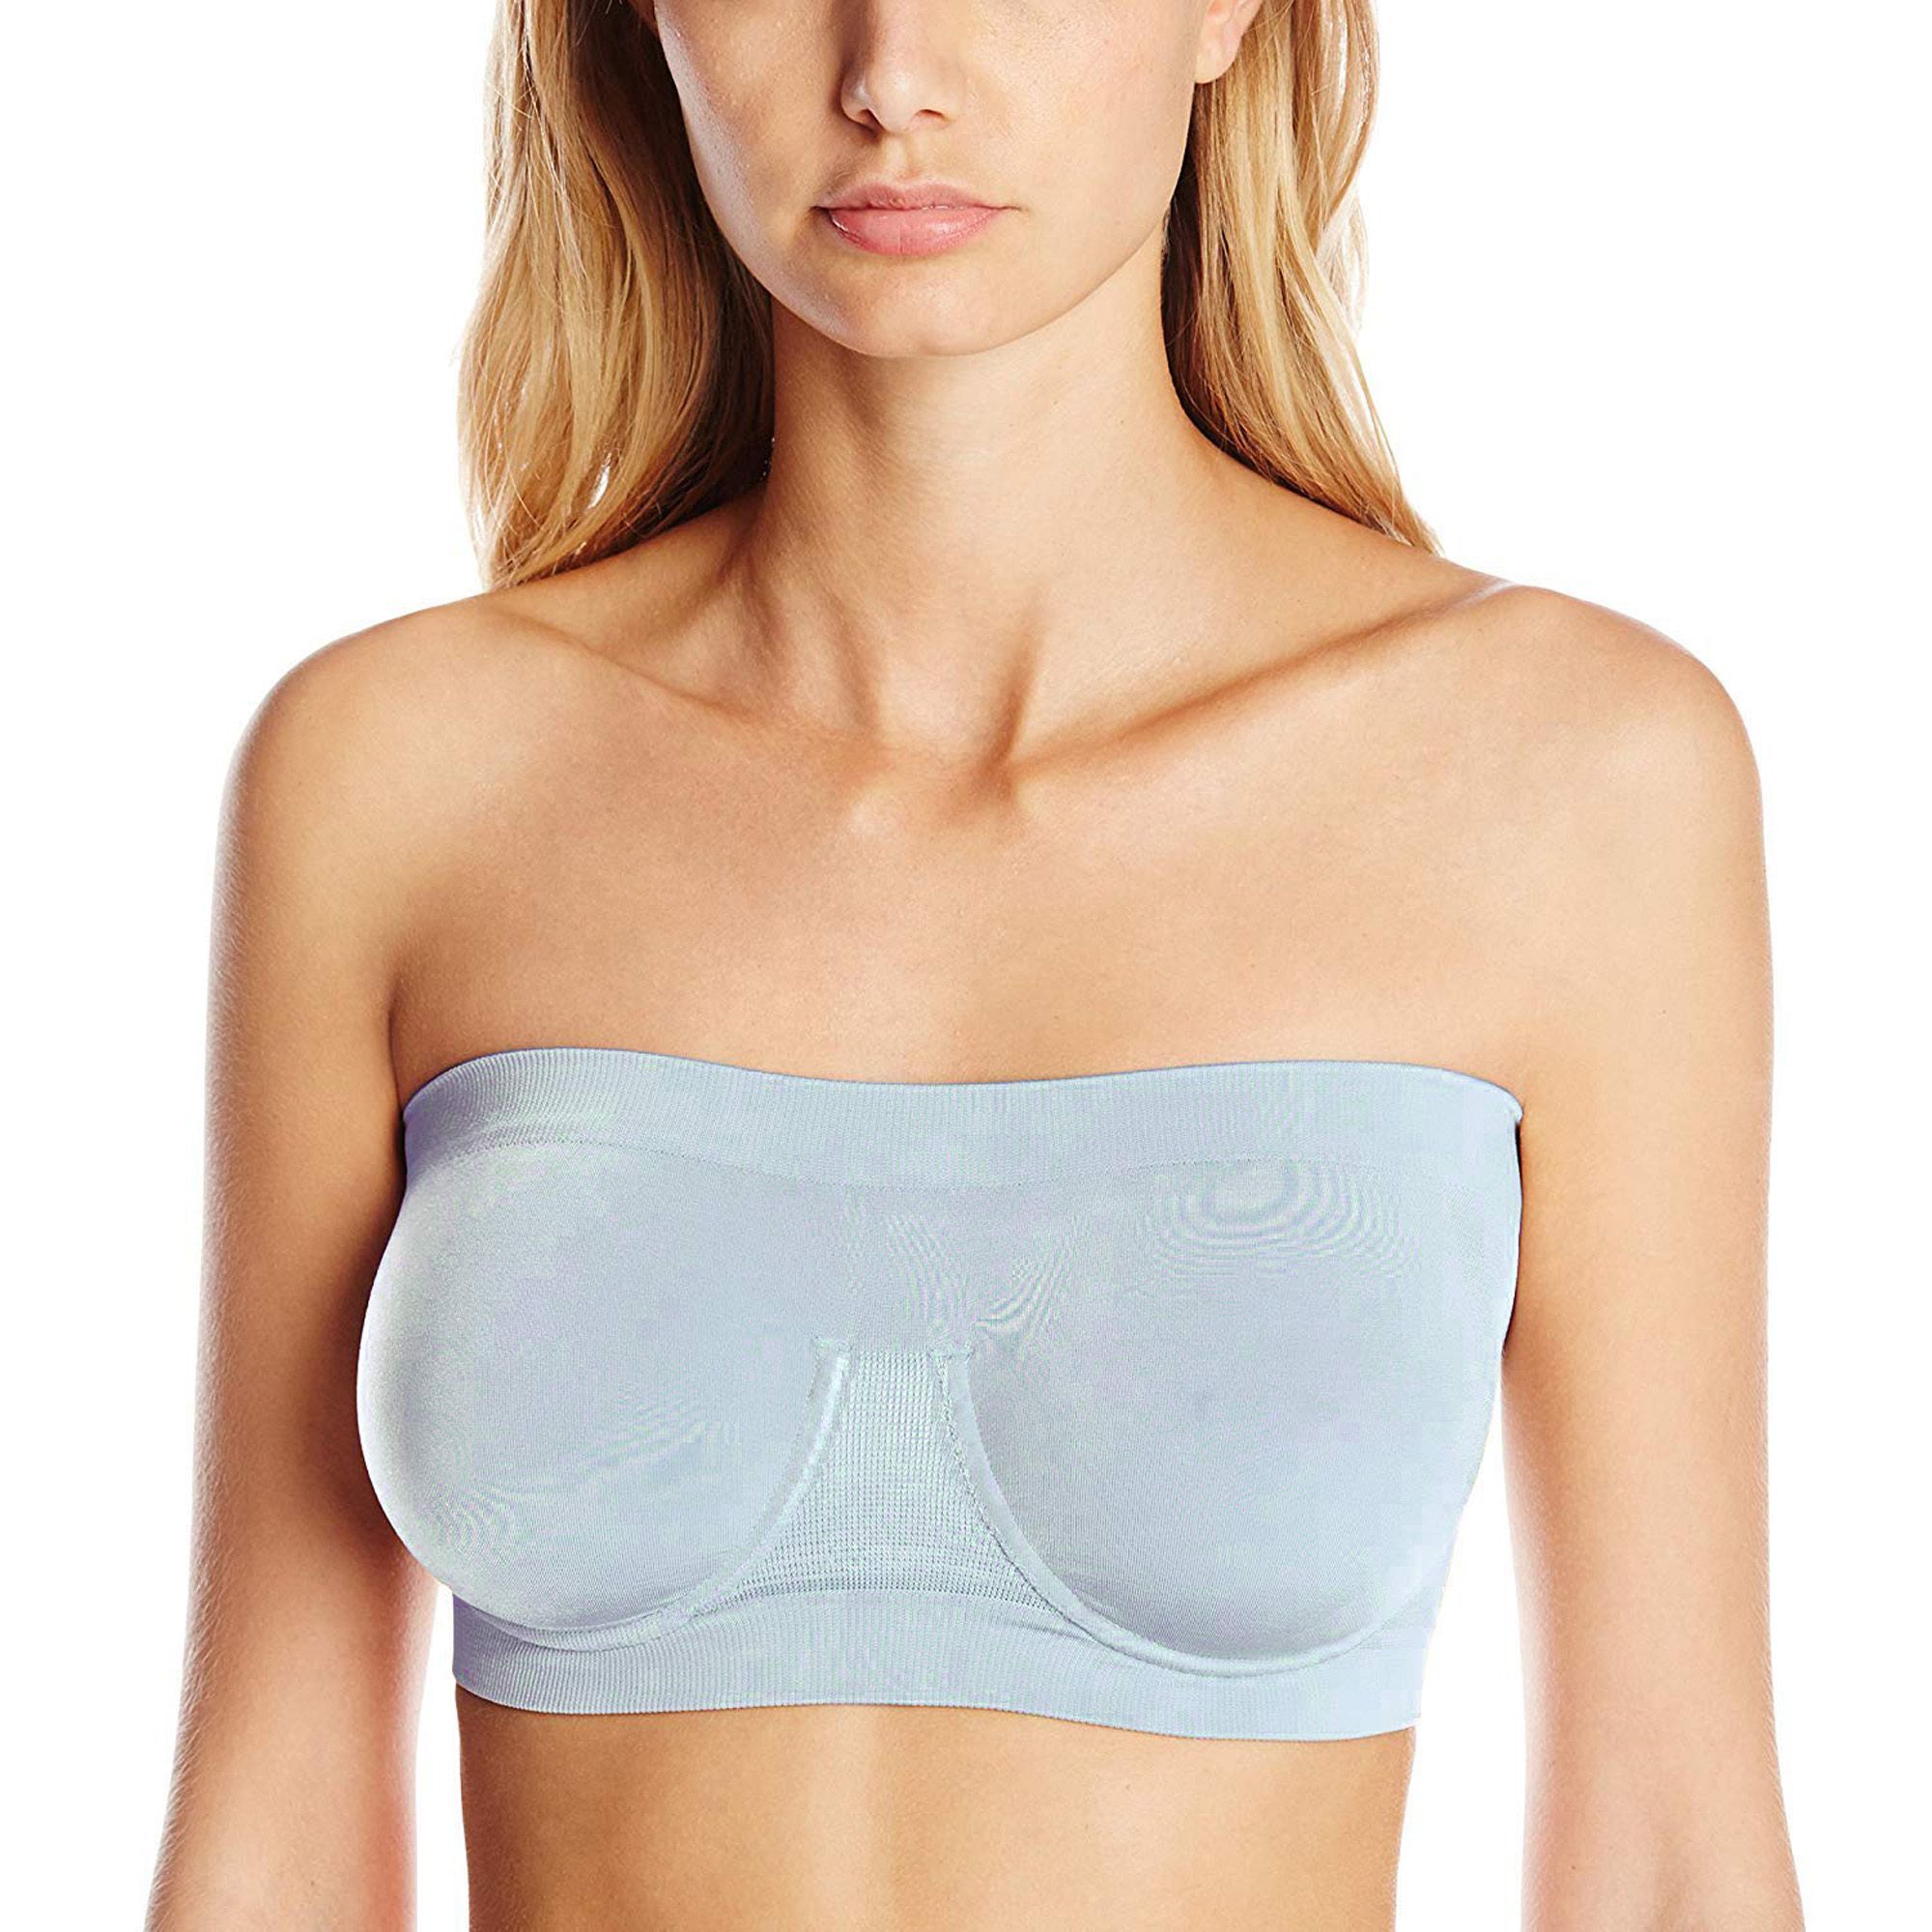 Youngest Girls With Small Tits - 11 Best Strapless Bras 2019 â€” Strapless Bra for Every Shape